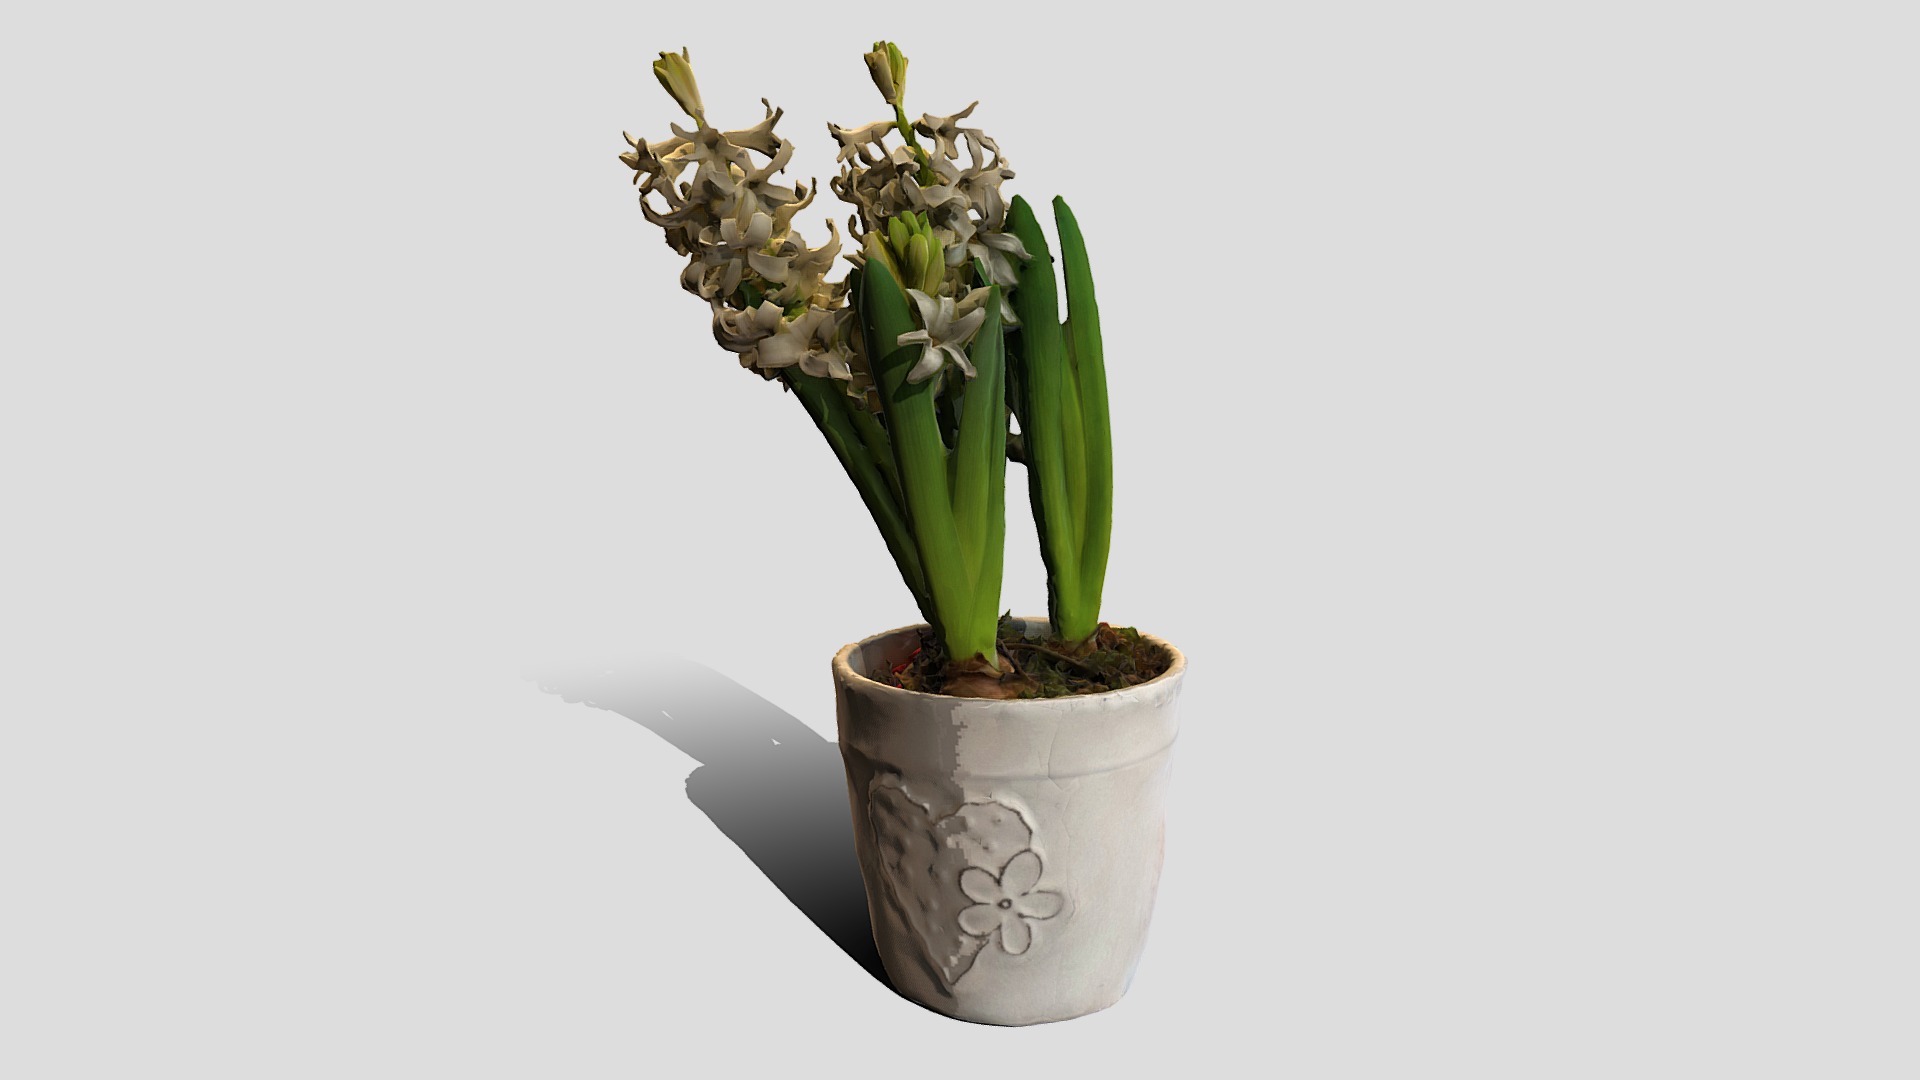 3D model 000061_Hyacinth - This is a 3D model of the 000061_Hyacinth. The 3D model is about a potted plant with a white background.